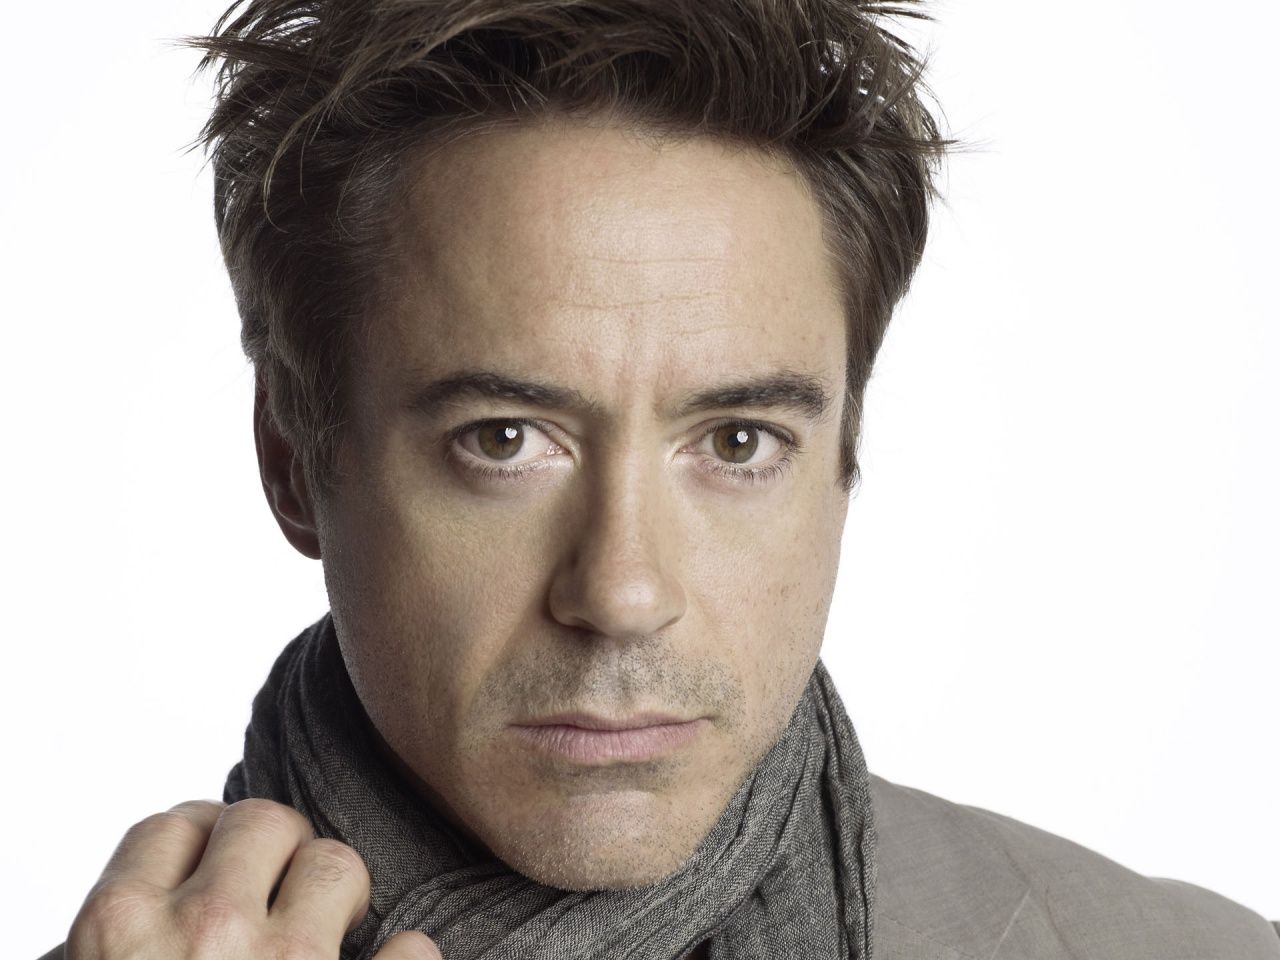 Robert Downey Jr. Sports Blue Hair in Magazine Cover Shoot - wide 9